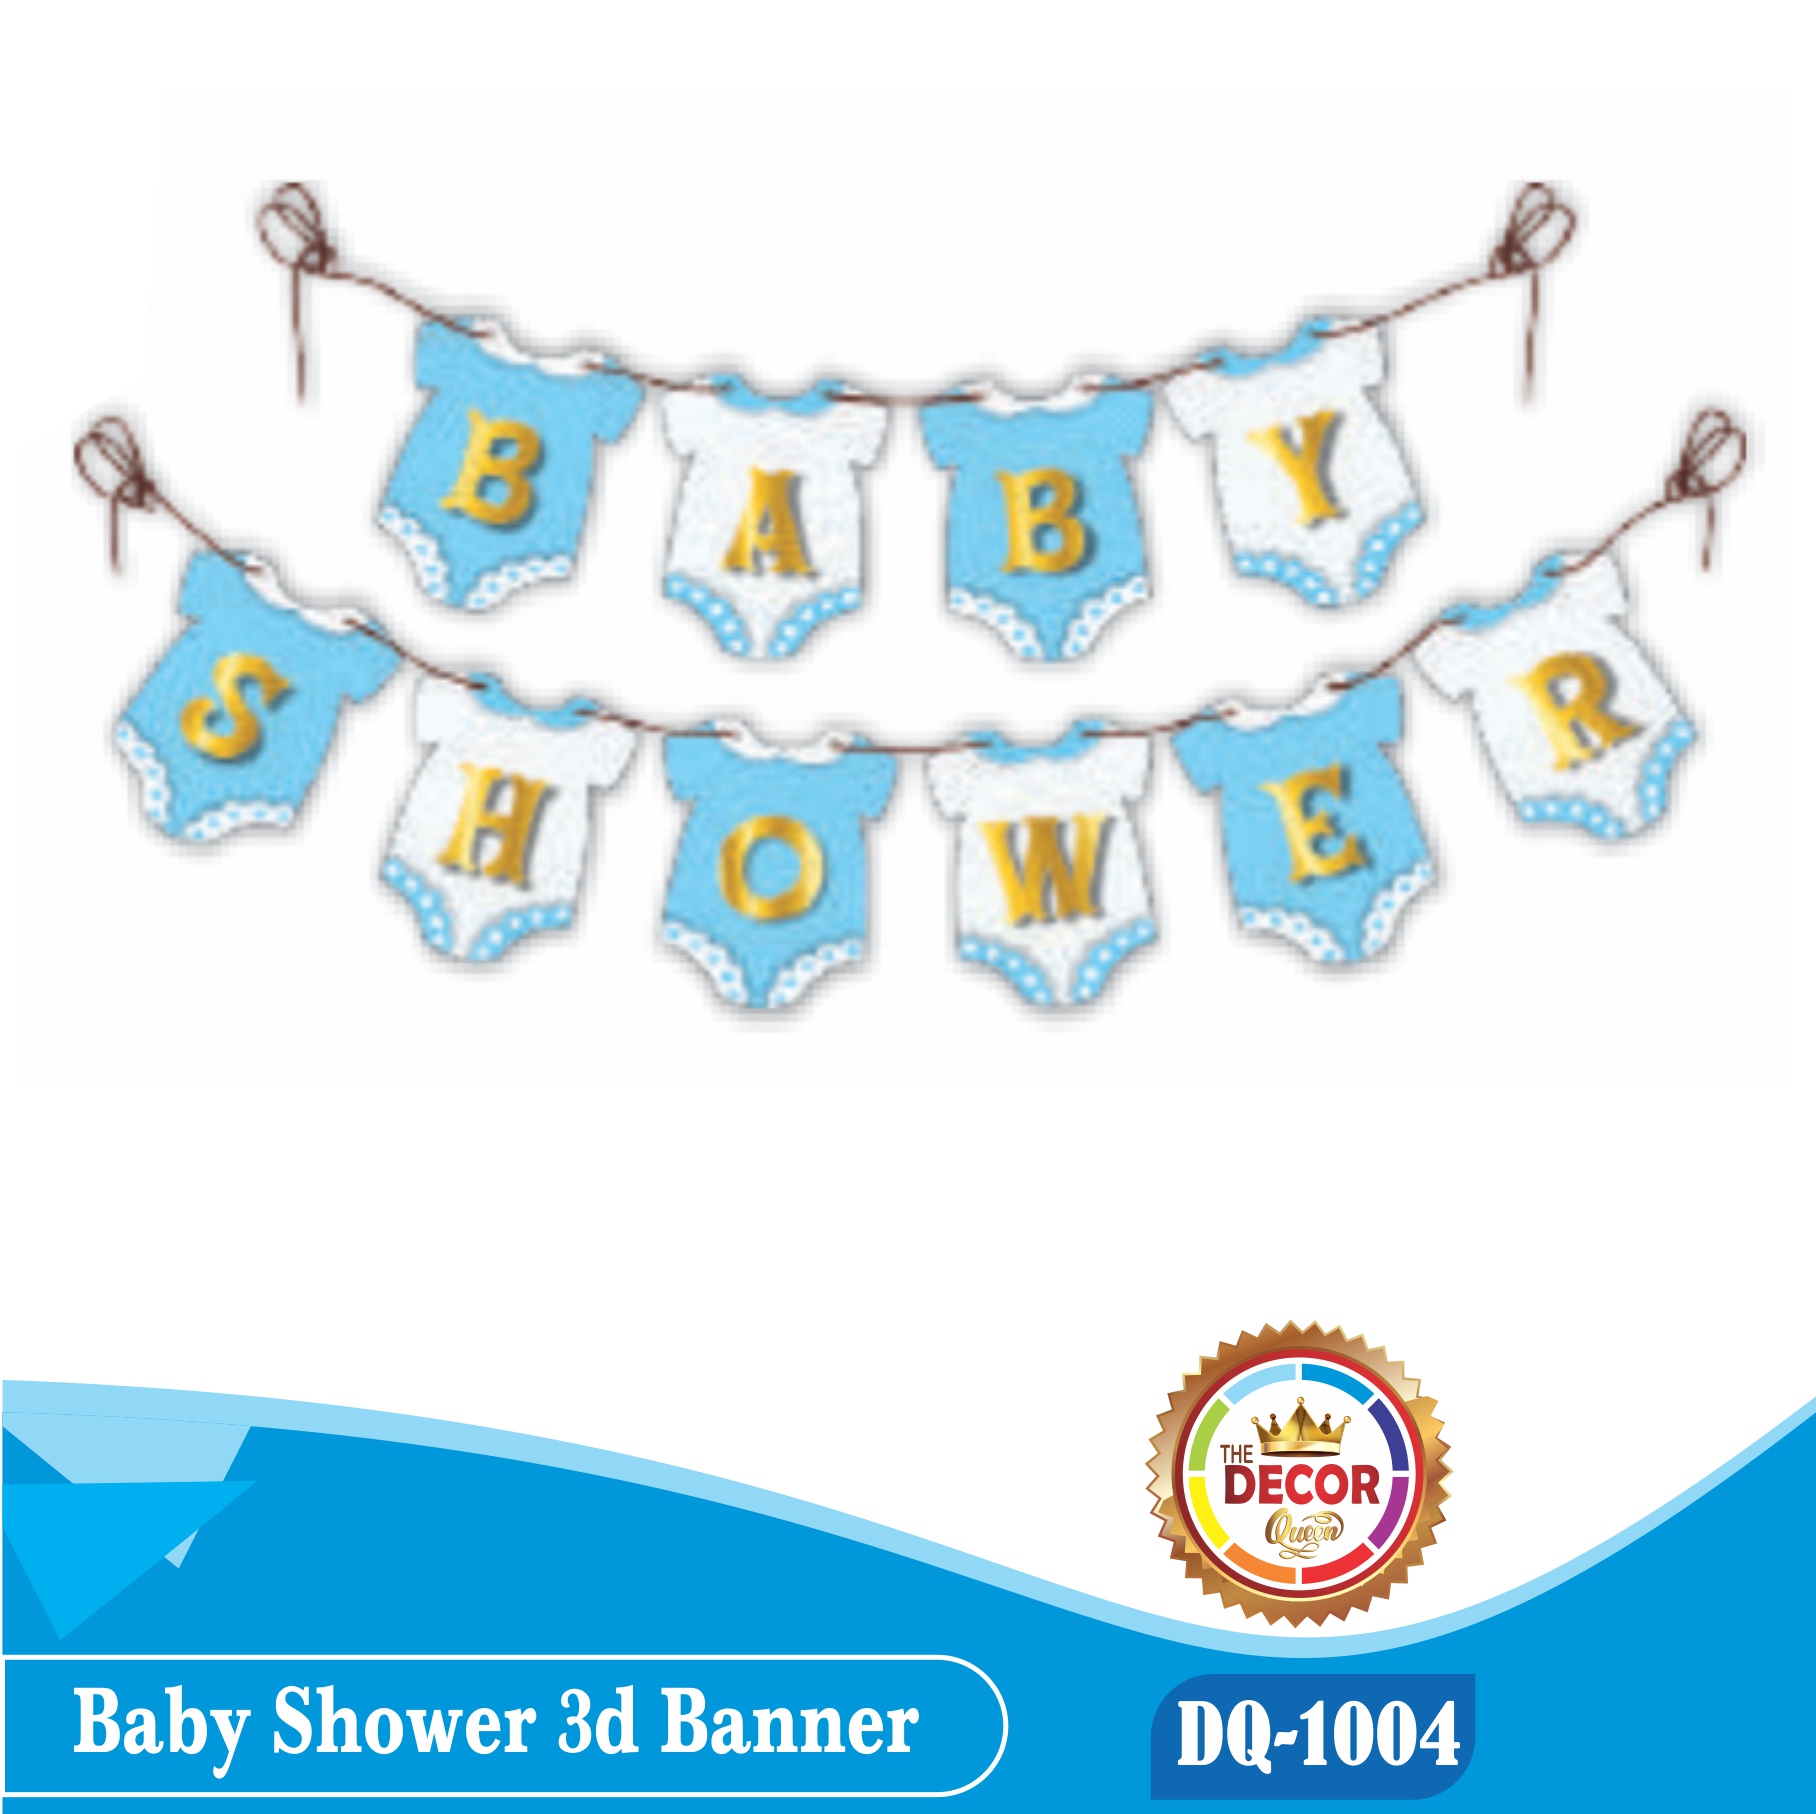 |Banners|Baby Shower Banner